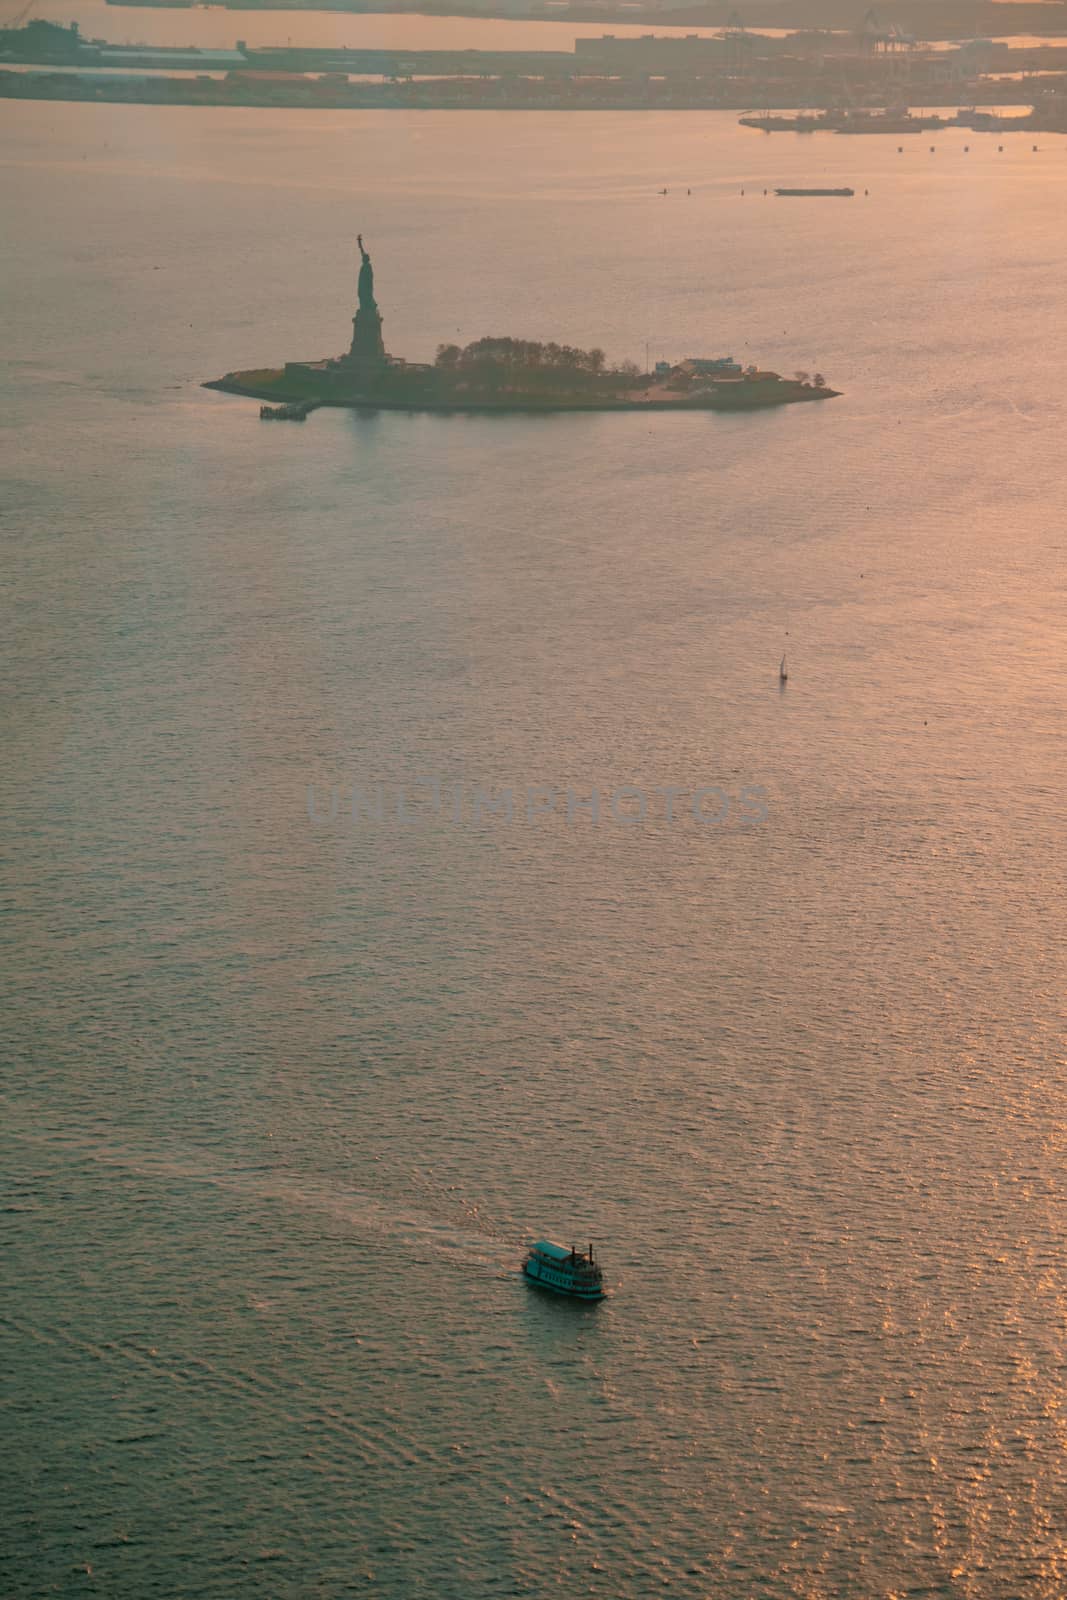 Liberty island and Statue of Liberty aerial photo at sunset or golden hour. Teal and orange style.